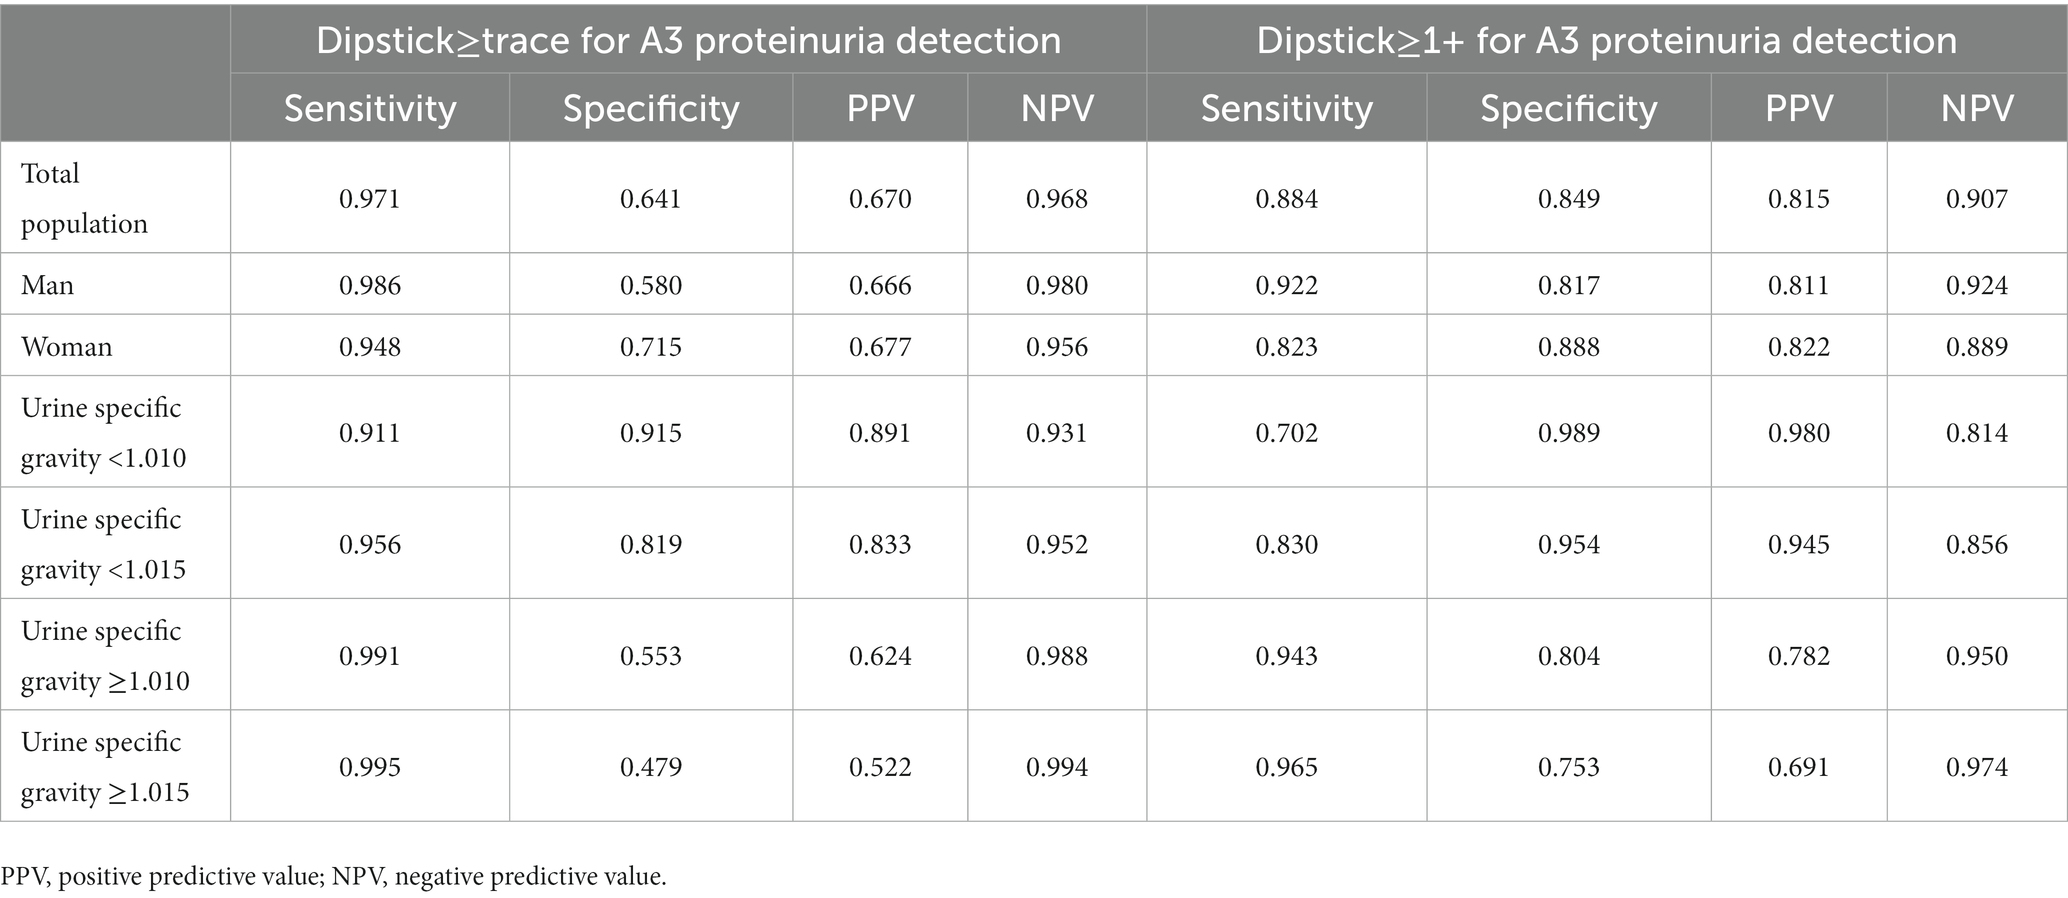 Frontiers Sex Differences In The Evaluation Of Proteinuria Using The Urine Dipstick Test 8036